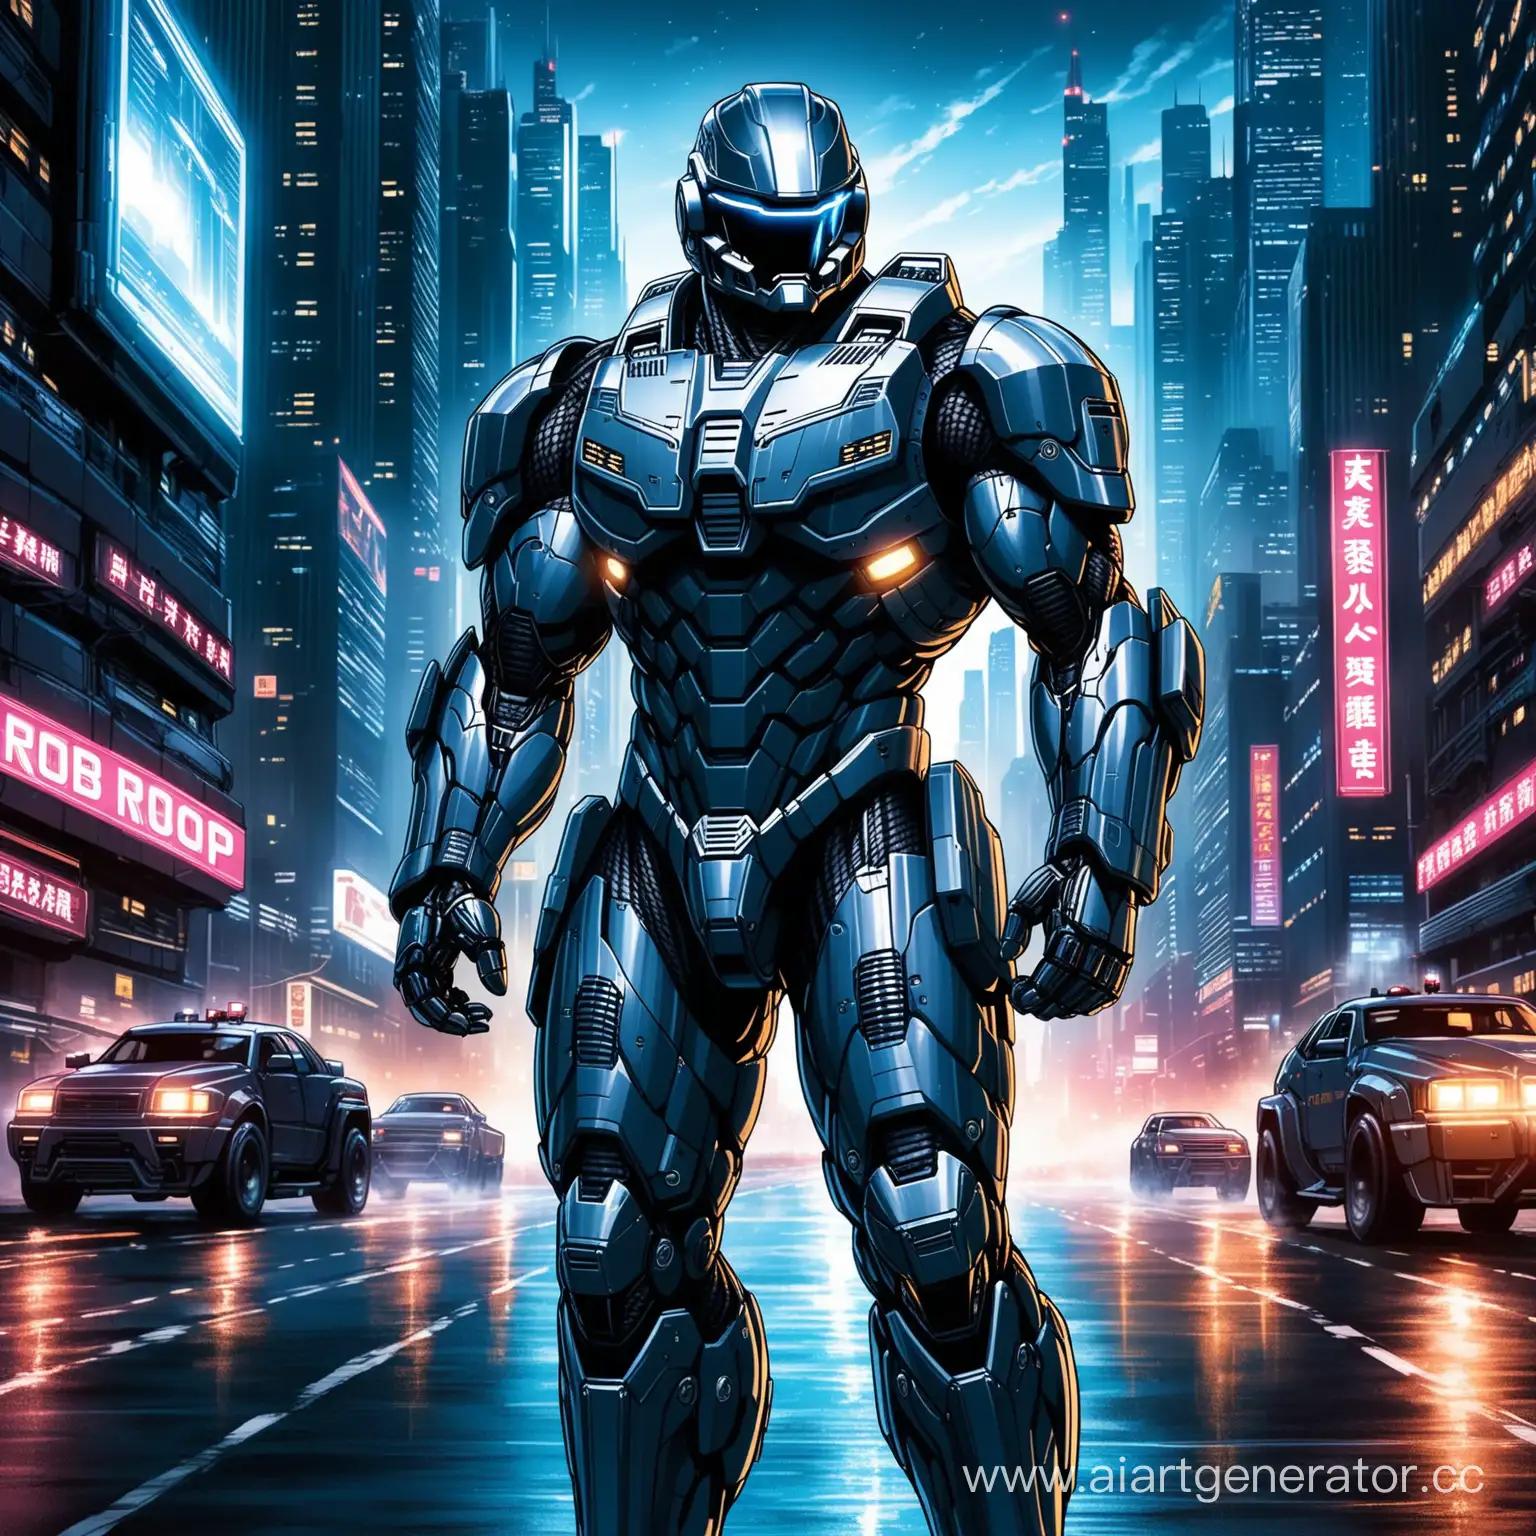 Powerful-Armored-Suit-in-Nighttime-Cityscape